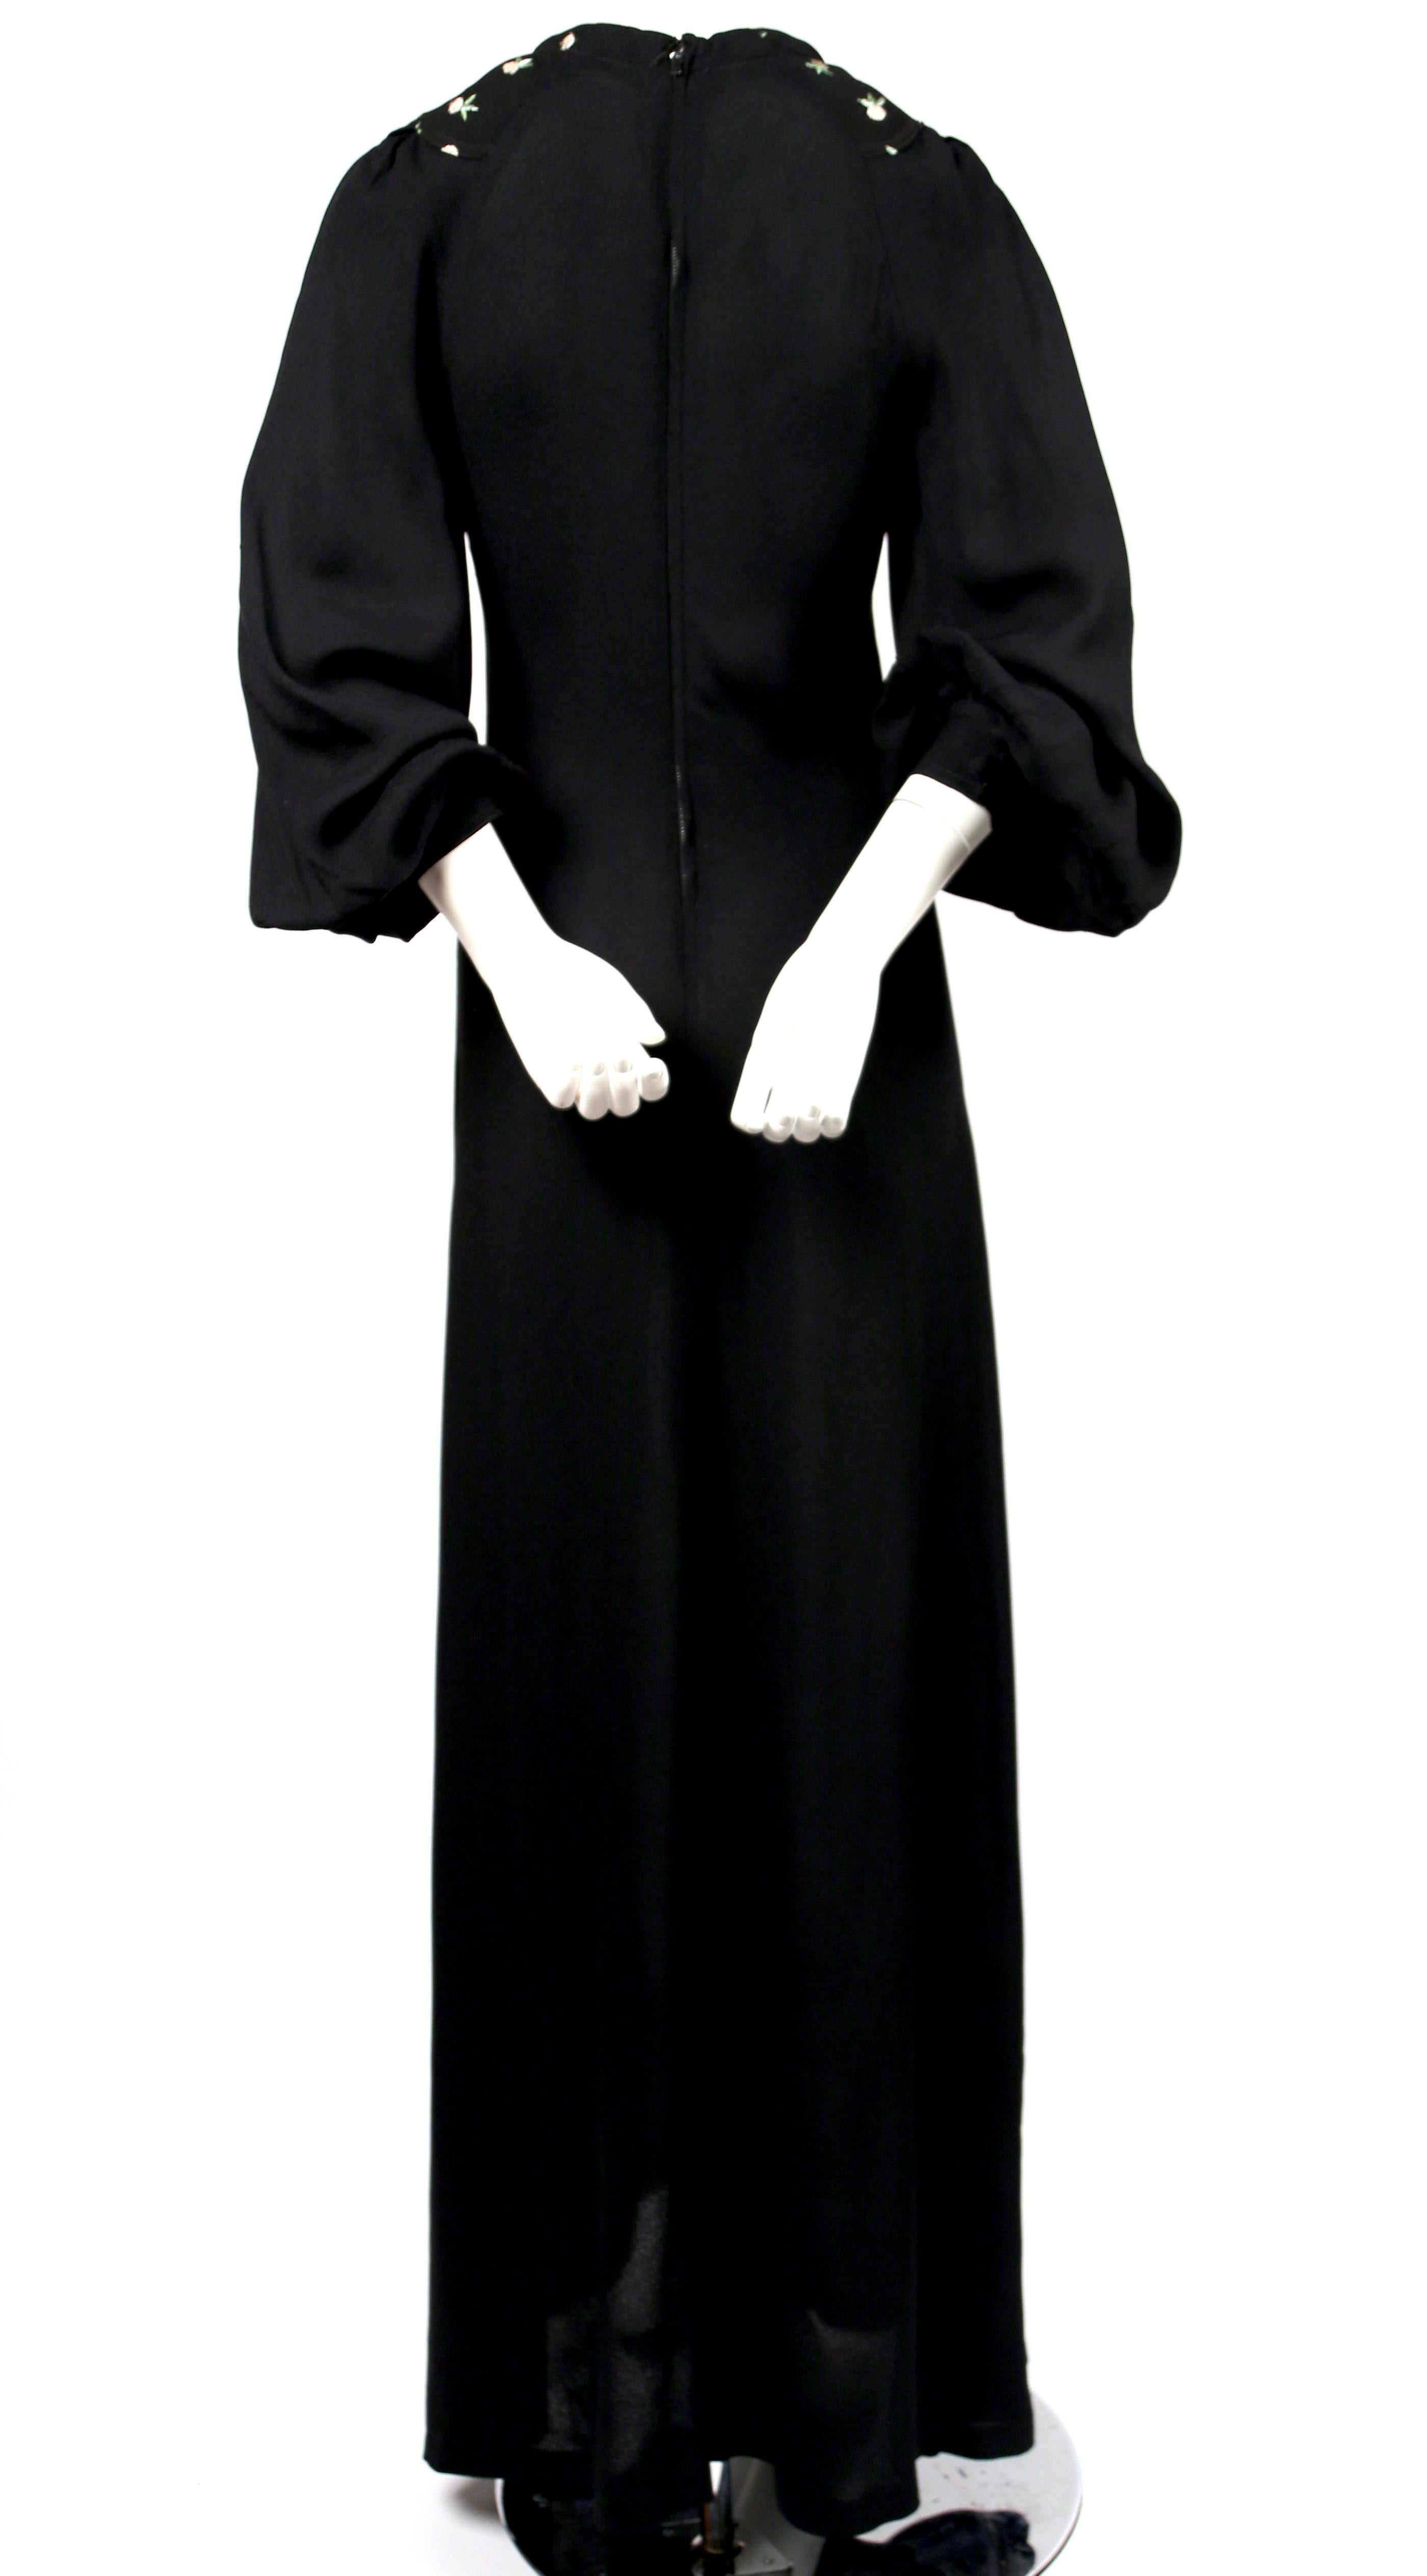 1970's OSSIE CLARK black moss crepe dress with keyhole neck and embroidery 1